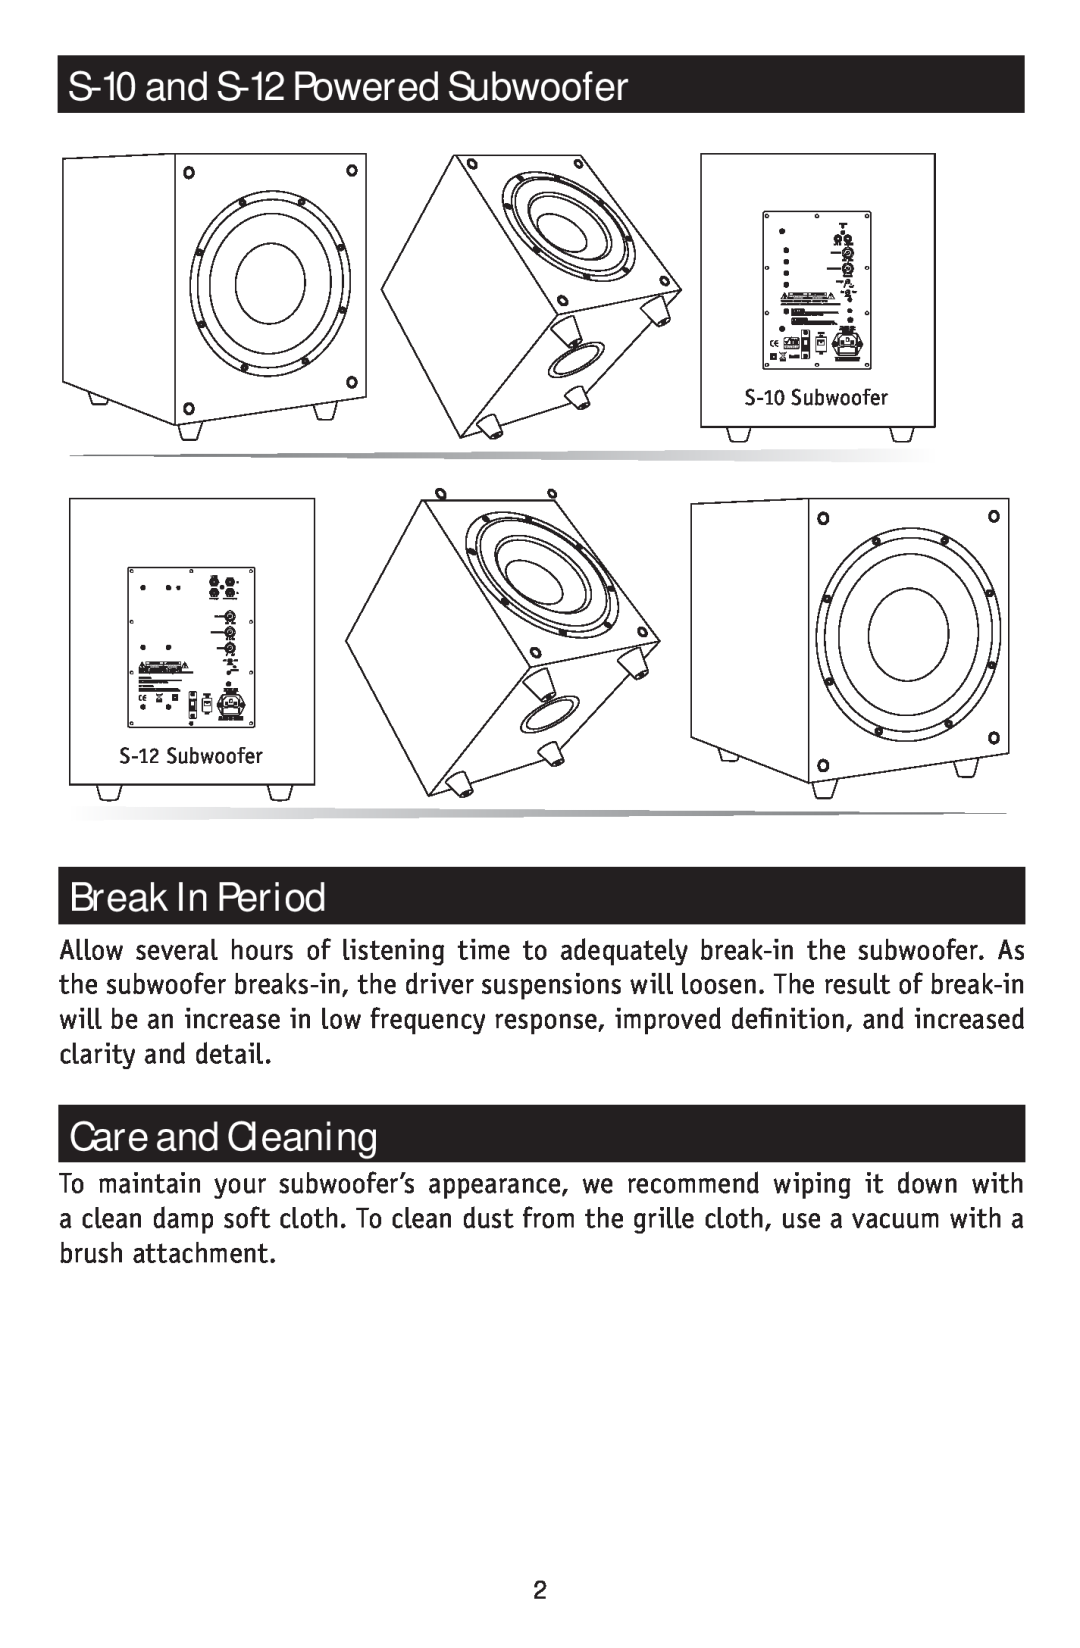 RBH Sound owner manual S-10and S-12Powered Subwoofer, Break In Period, Care and Cleaning, S-10Subwoofer S-12Subwoofer 